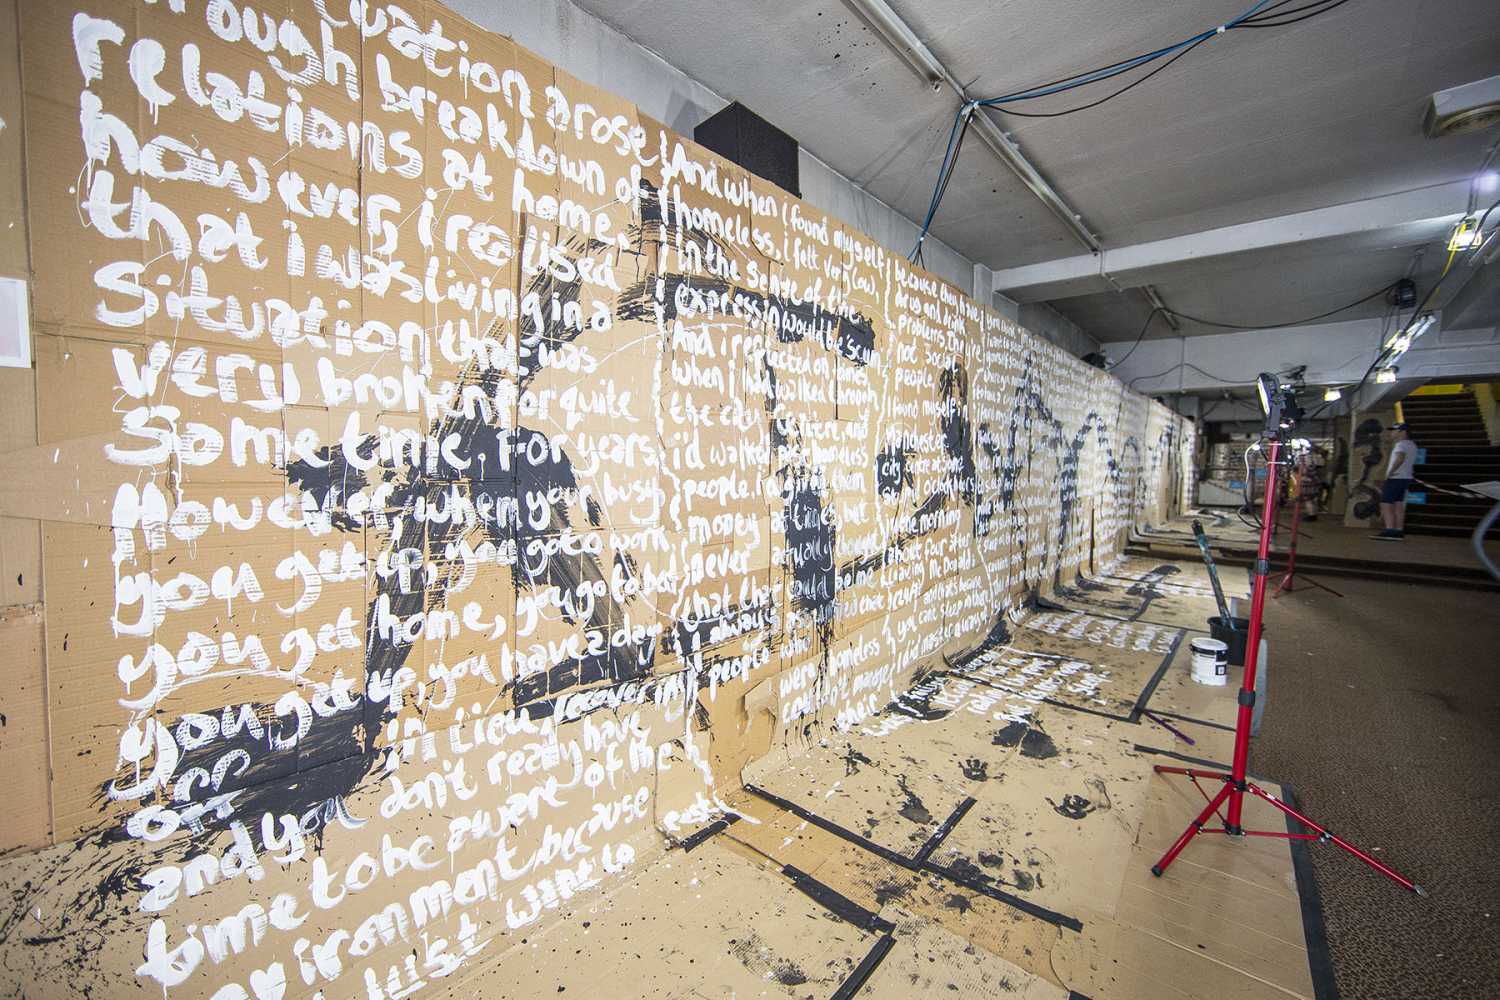 Manchester Street Poem was created by Karl Hyde and Rick Smith from Underworld (photo: Louise Stickland)